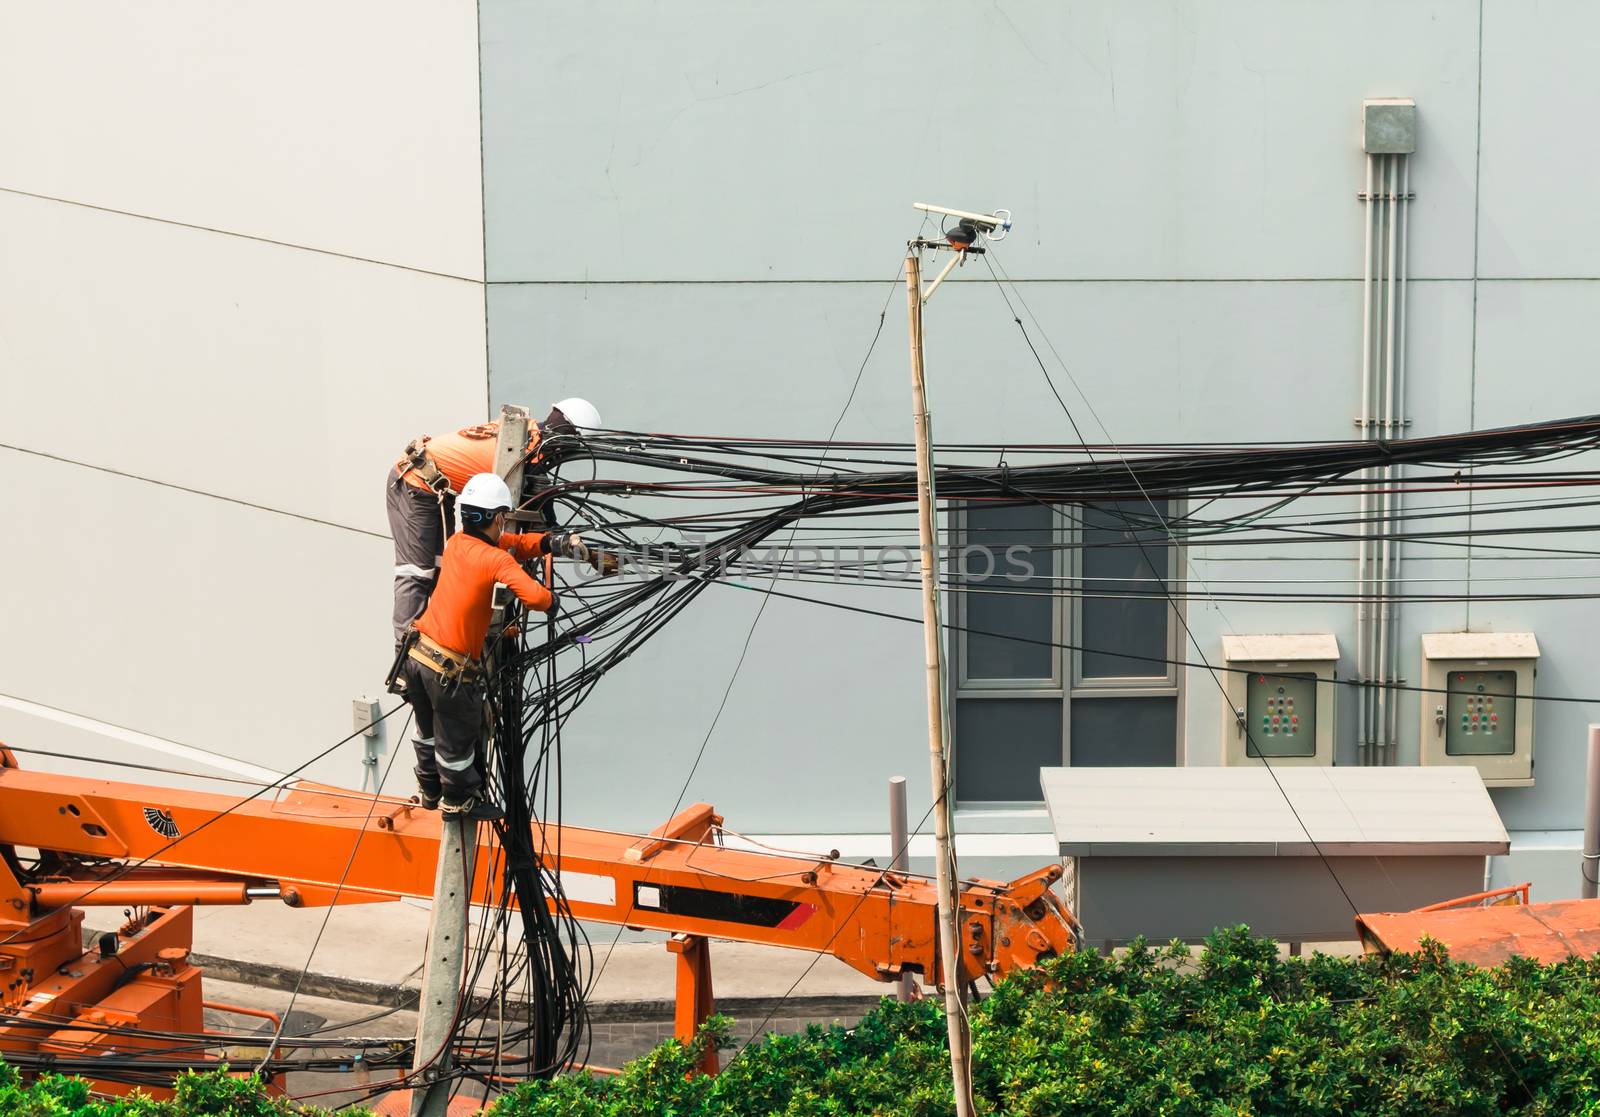 Electricians Engineer are climbing on electric poles to install and repair power lines.